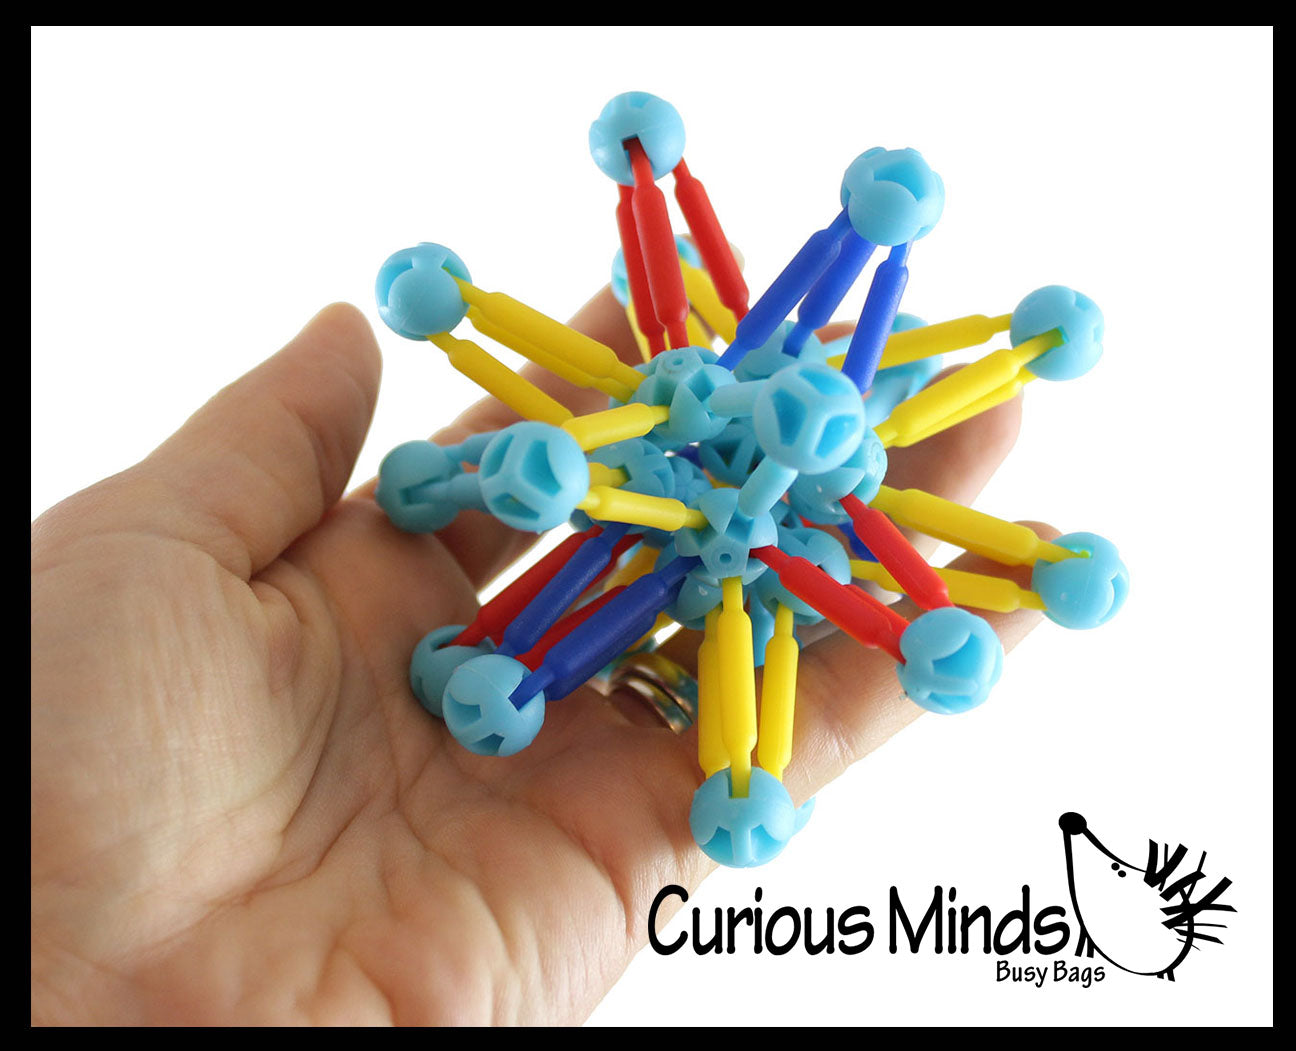 Mini Collapsible Ball - Expanding and Contracting Ball - Grow and